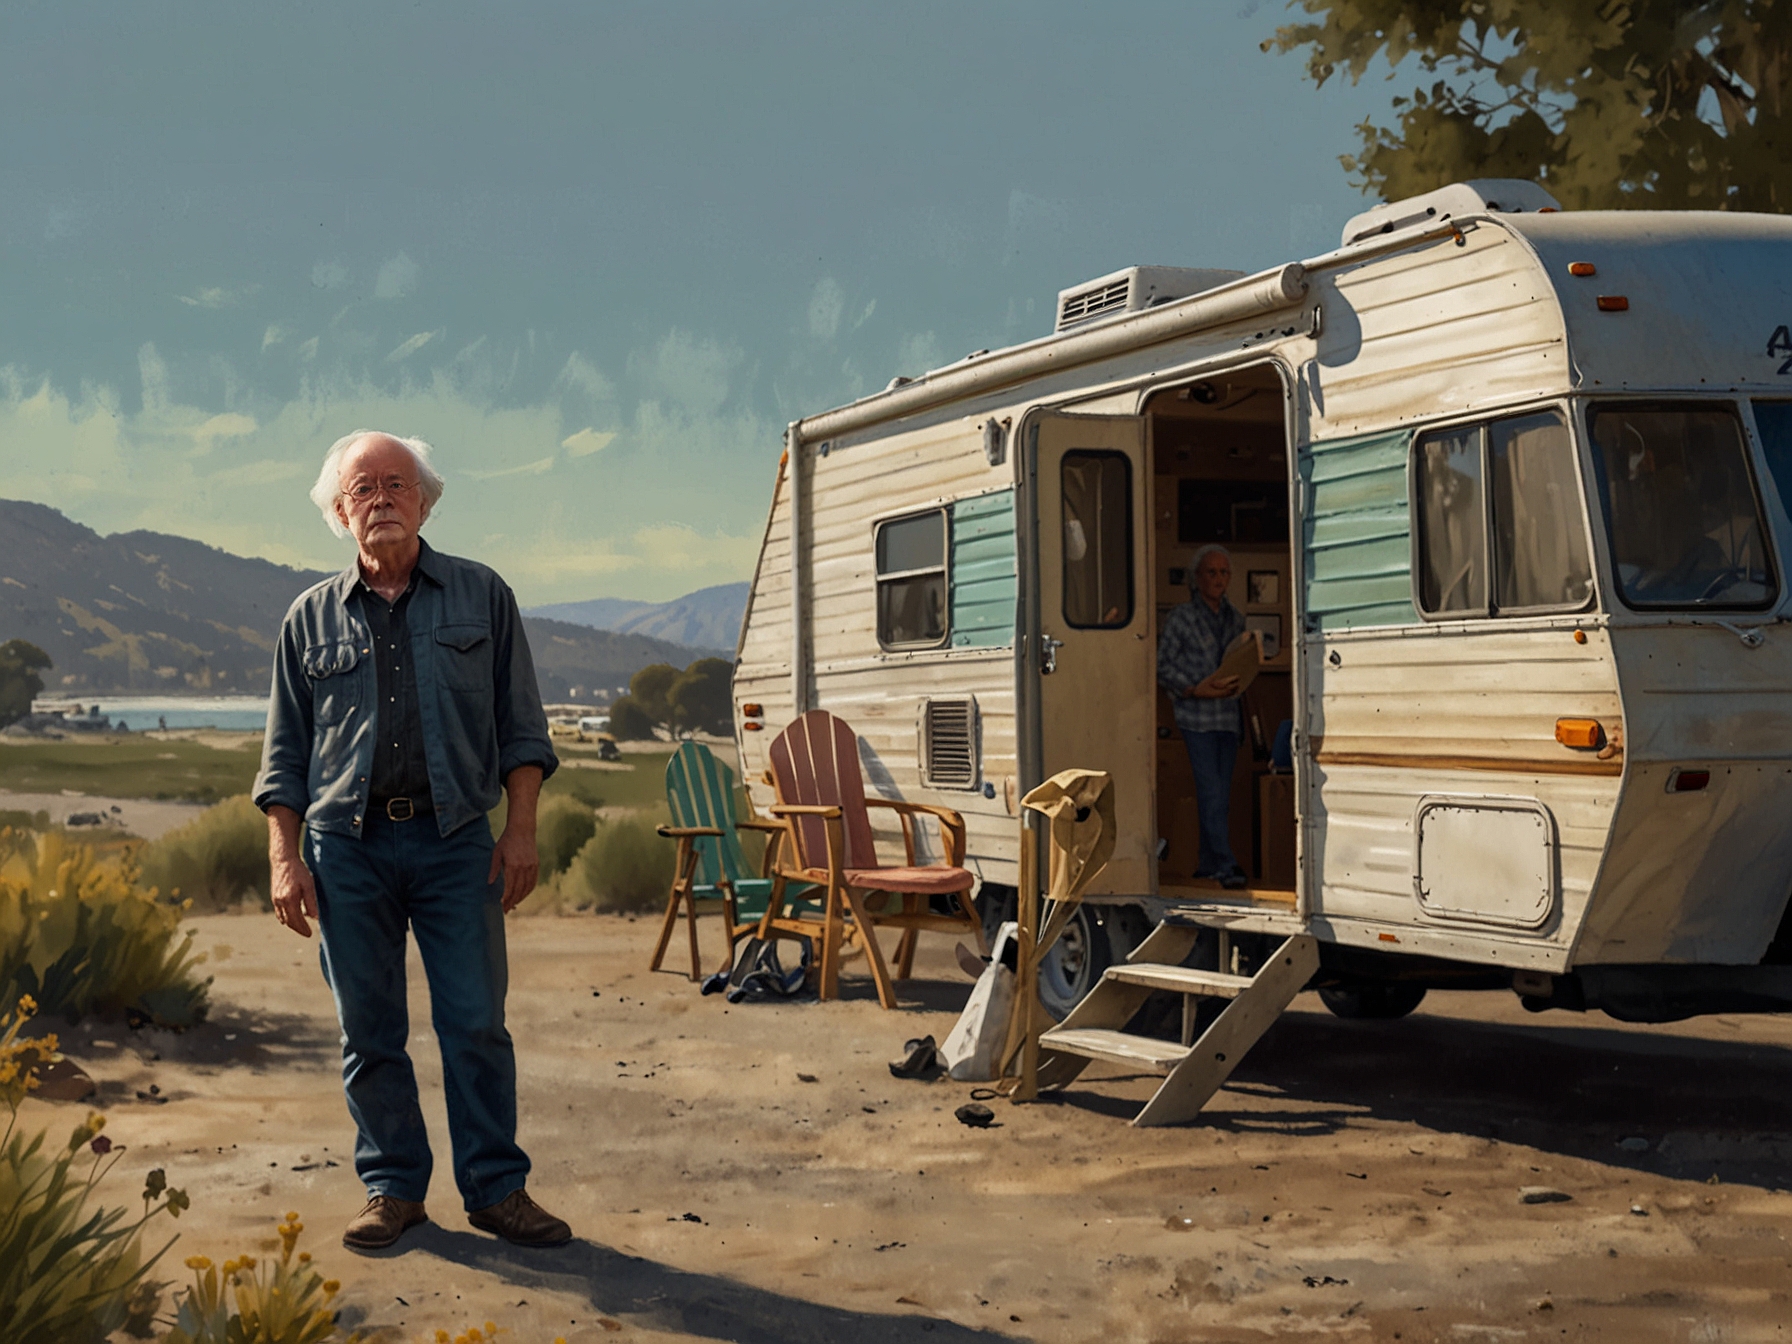 John Adams standing outside his RV in the East Bay area, appearing concerned about the new law that allows his home to be towed away with him still inside.